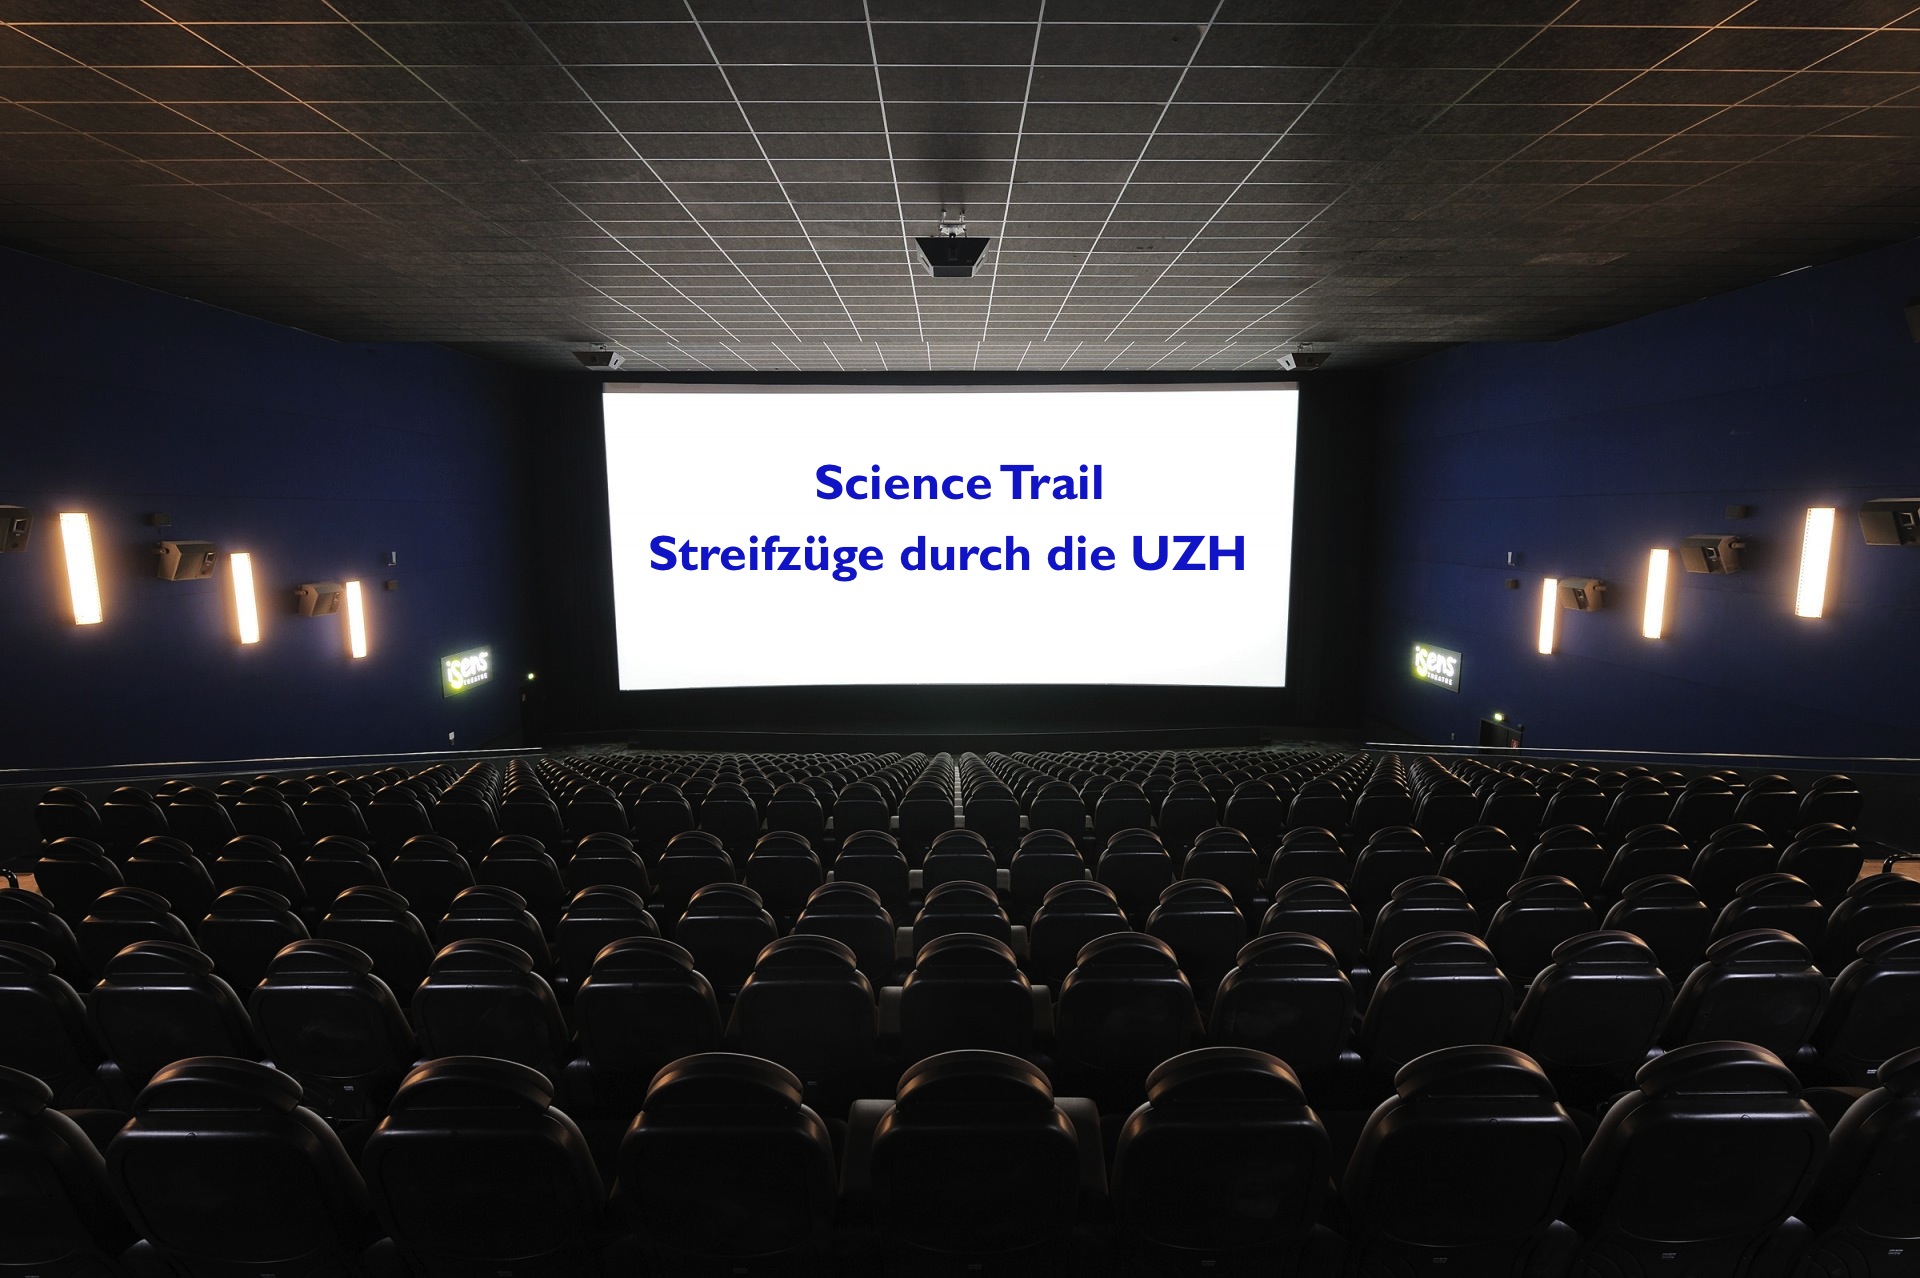 Cinema with Thext "Science Trails"